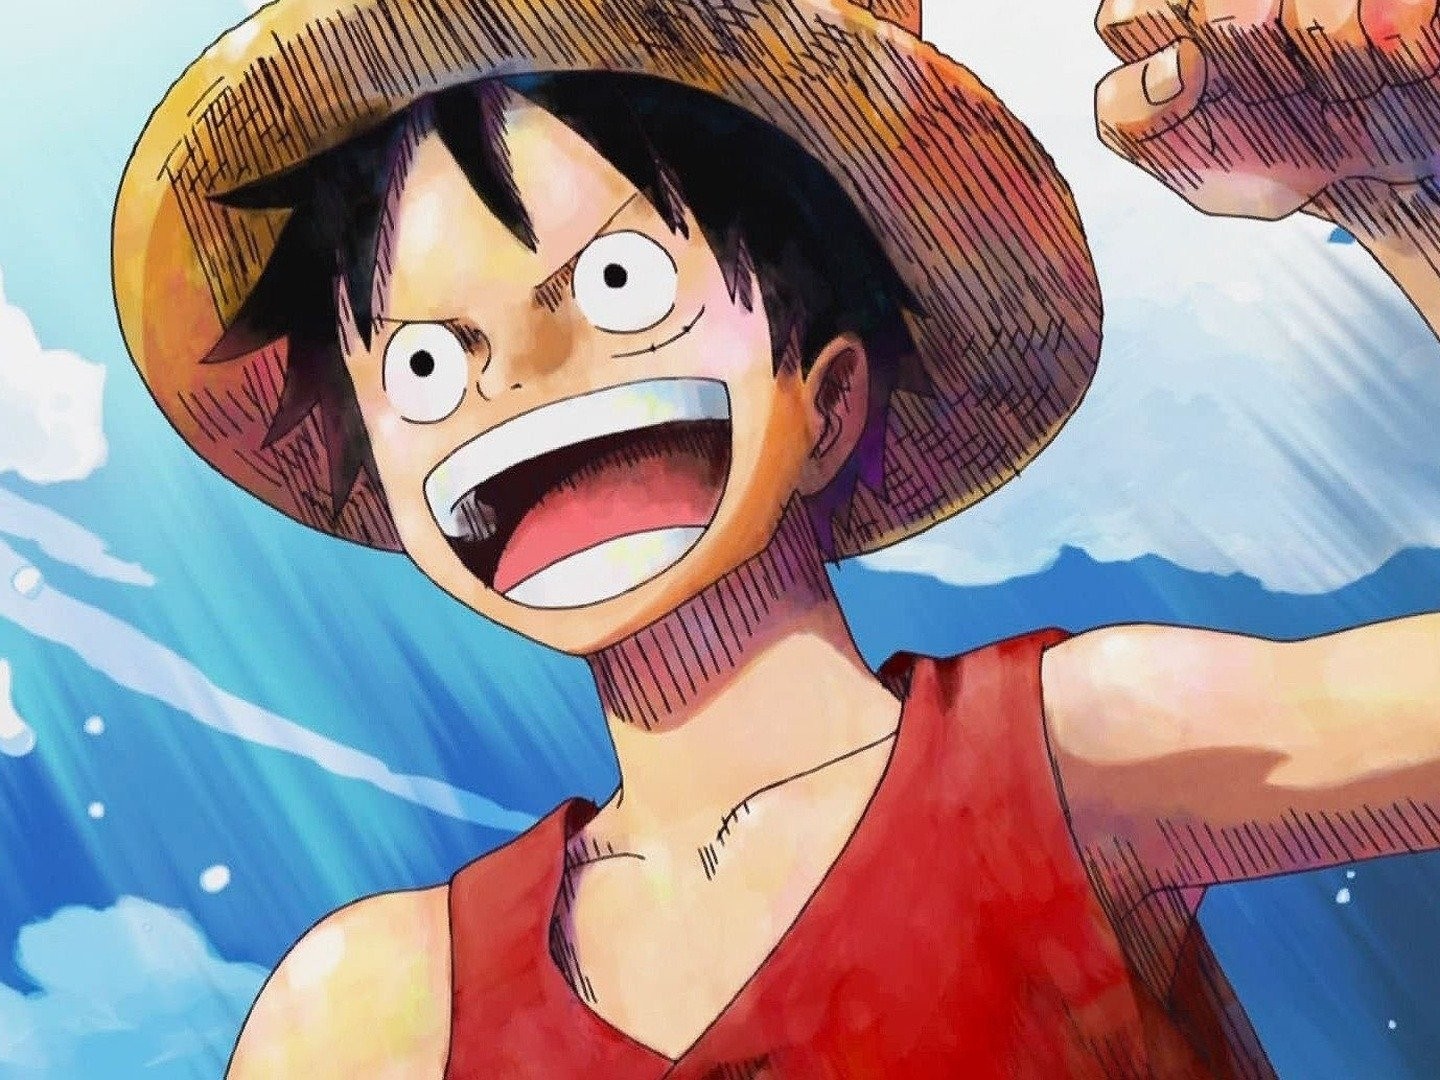 One Piece: Episode of Luffy - Adventure on Hand Island - Rotten Tomatoes